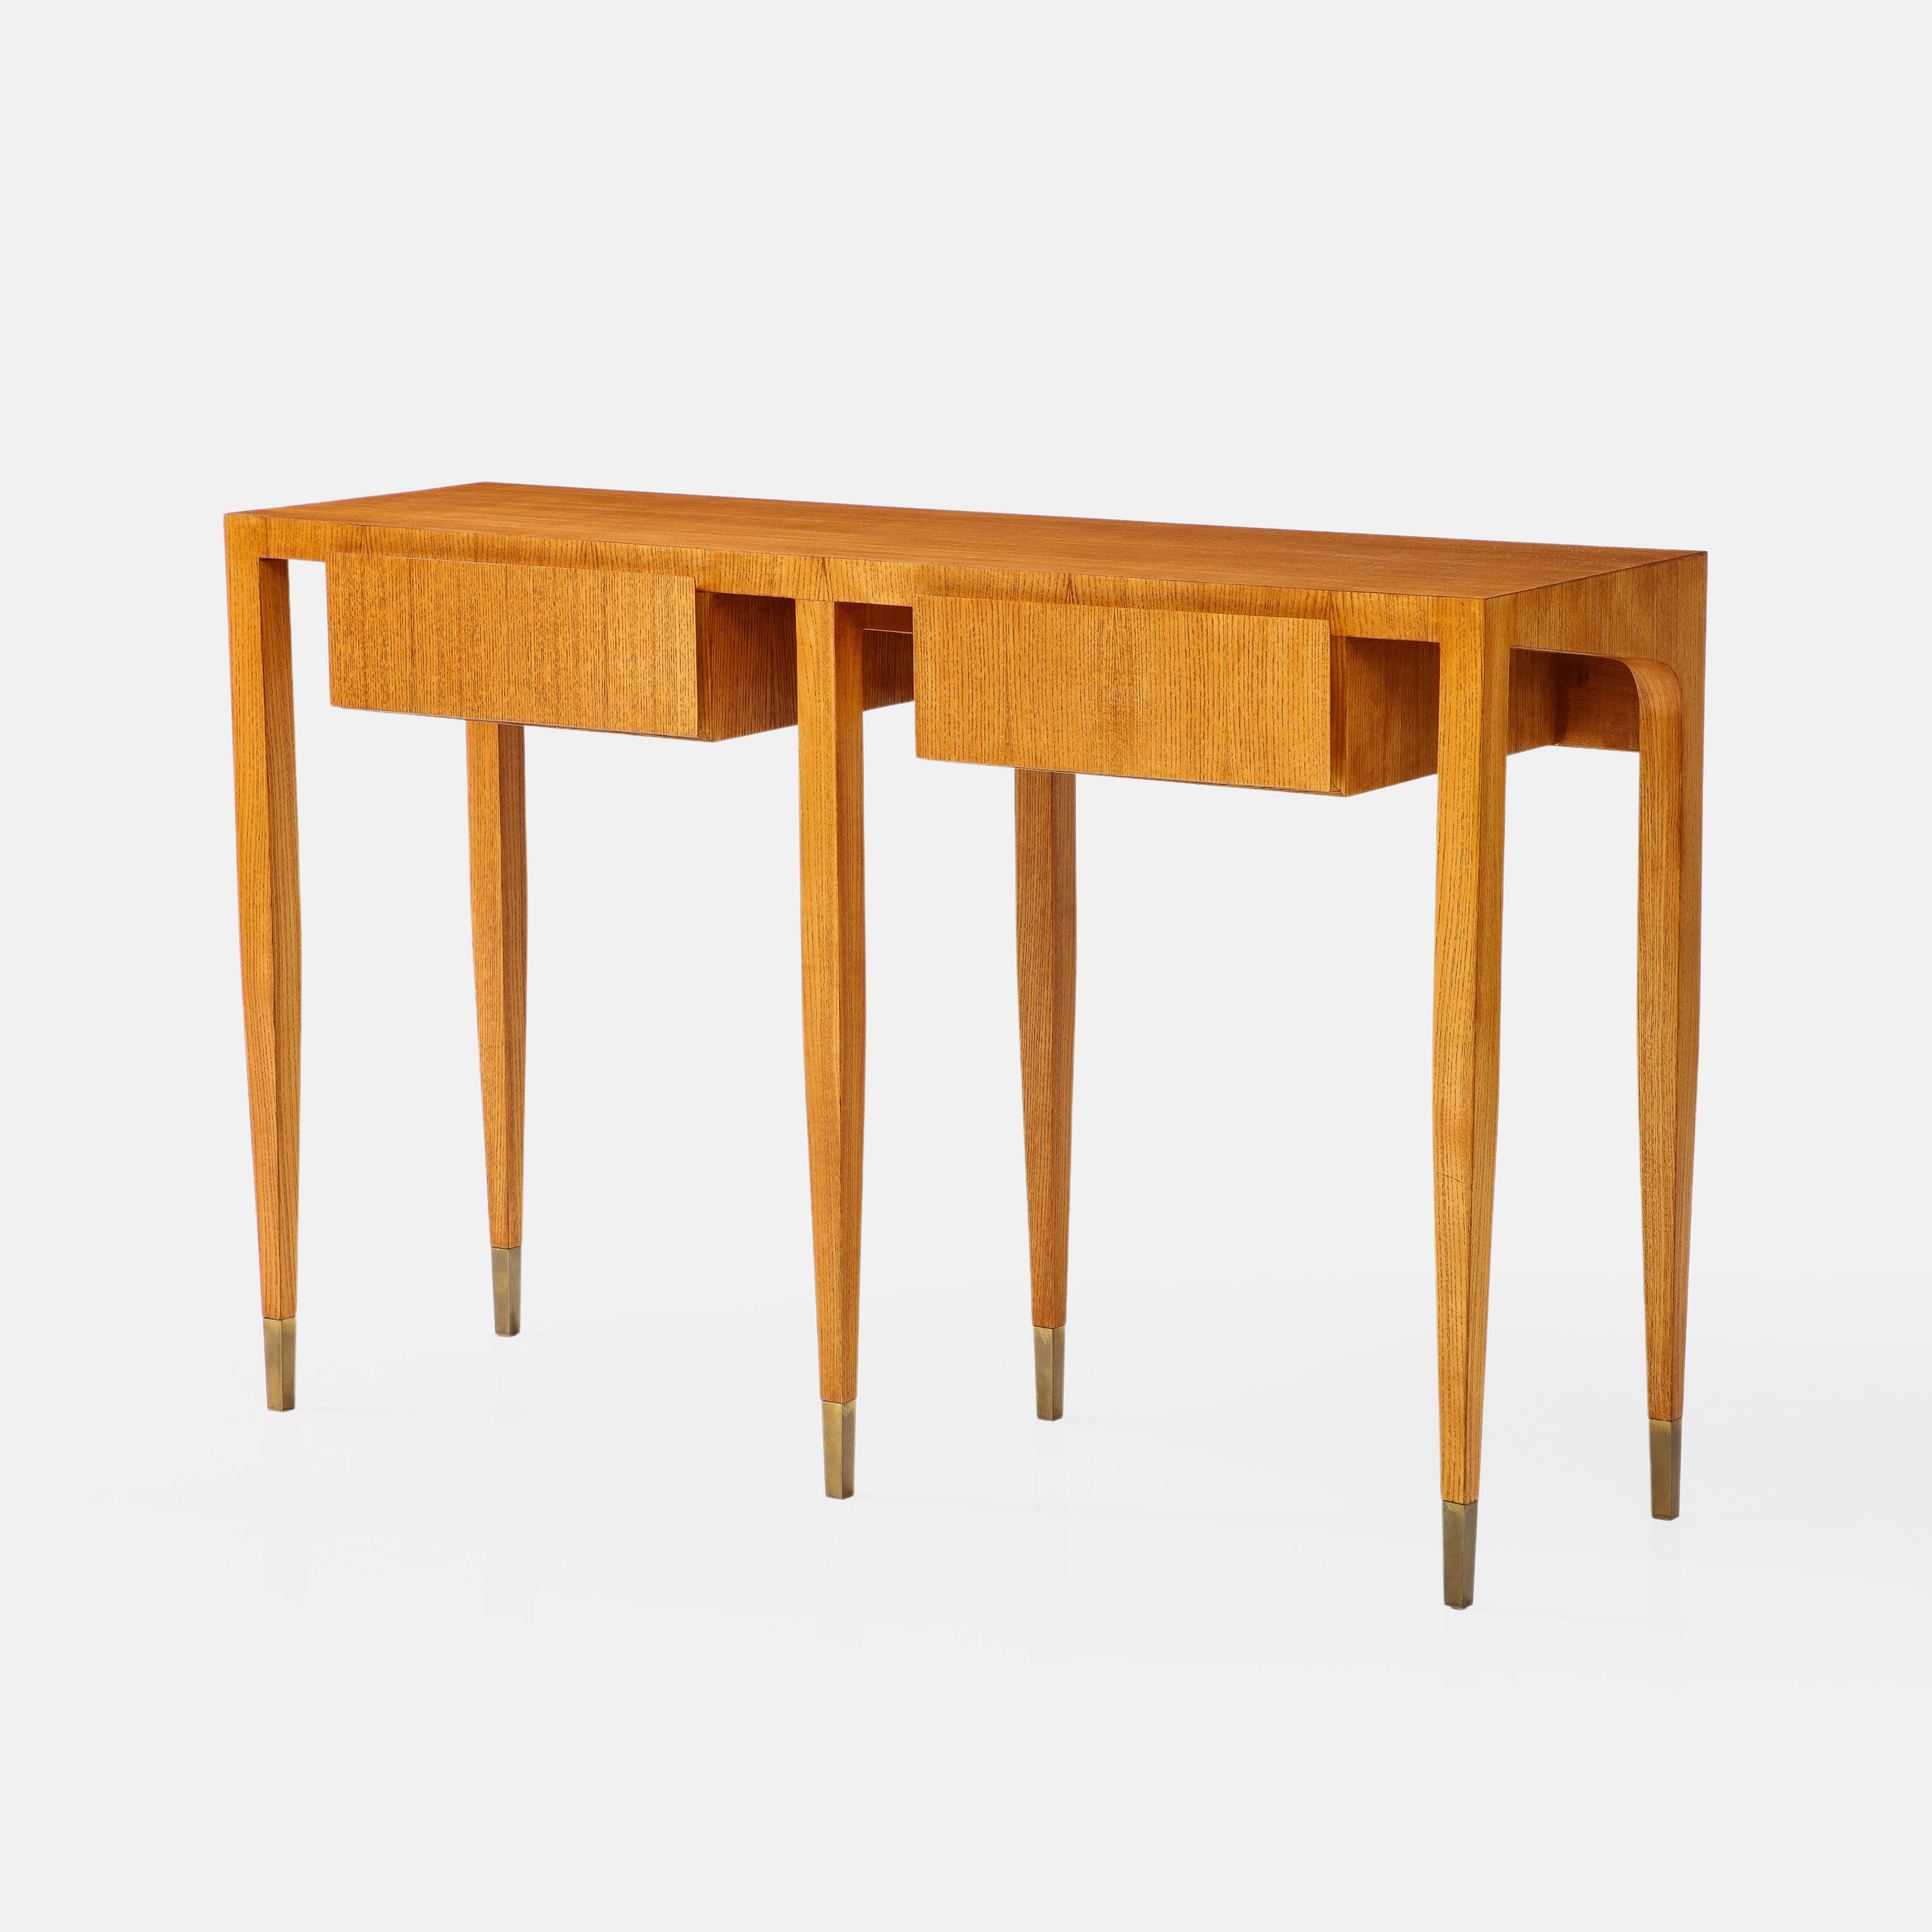 Gio Ponti for Giordano Chiesa Rare Pair of Ash Wood Consoles, Italy, 1950s For Sale 9